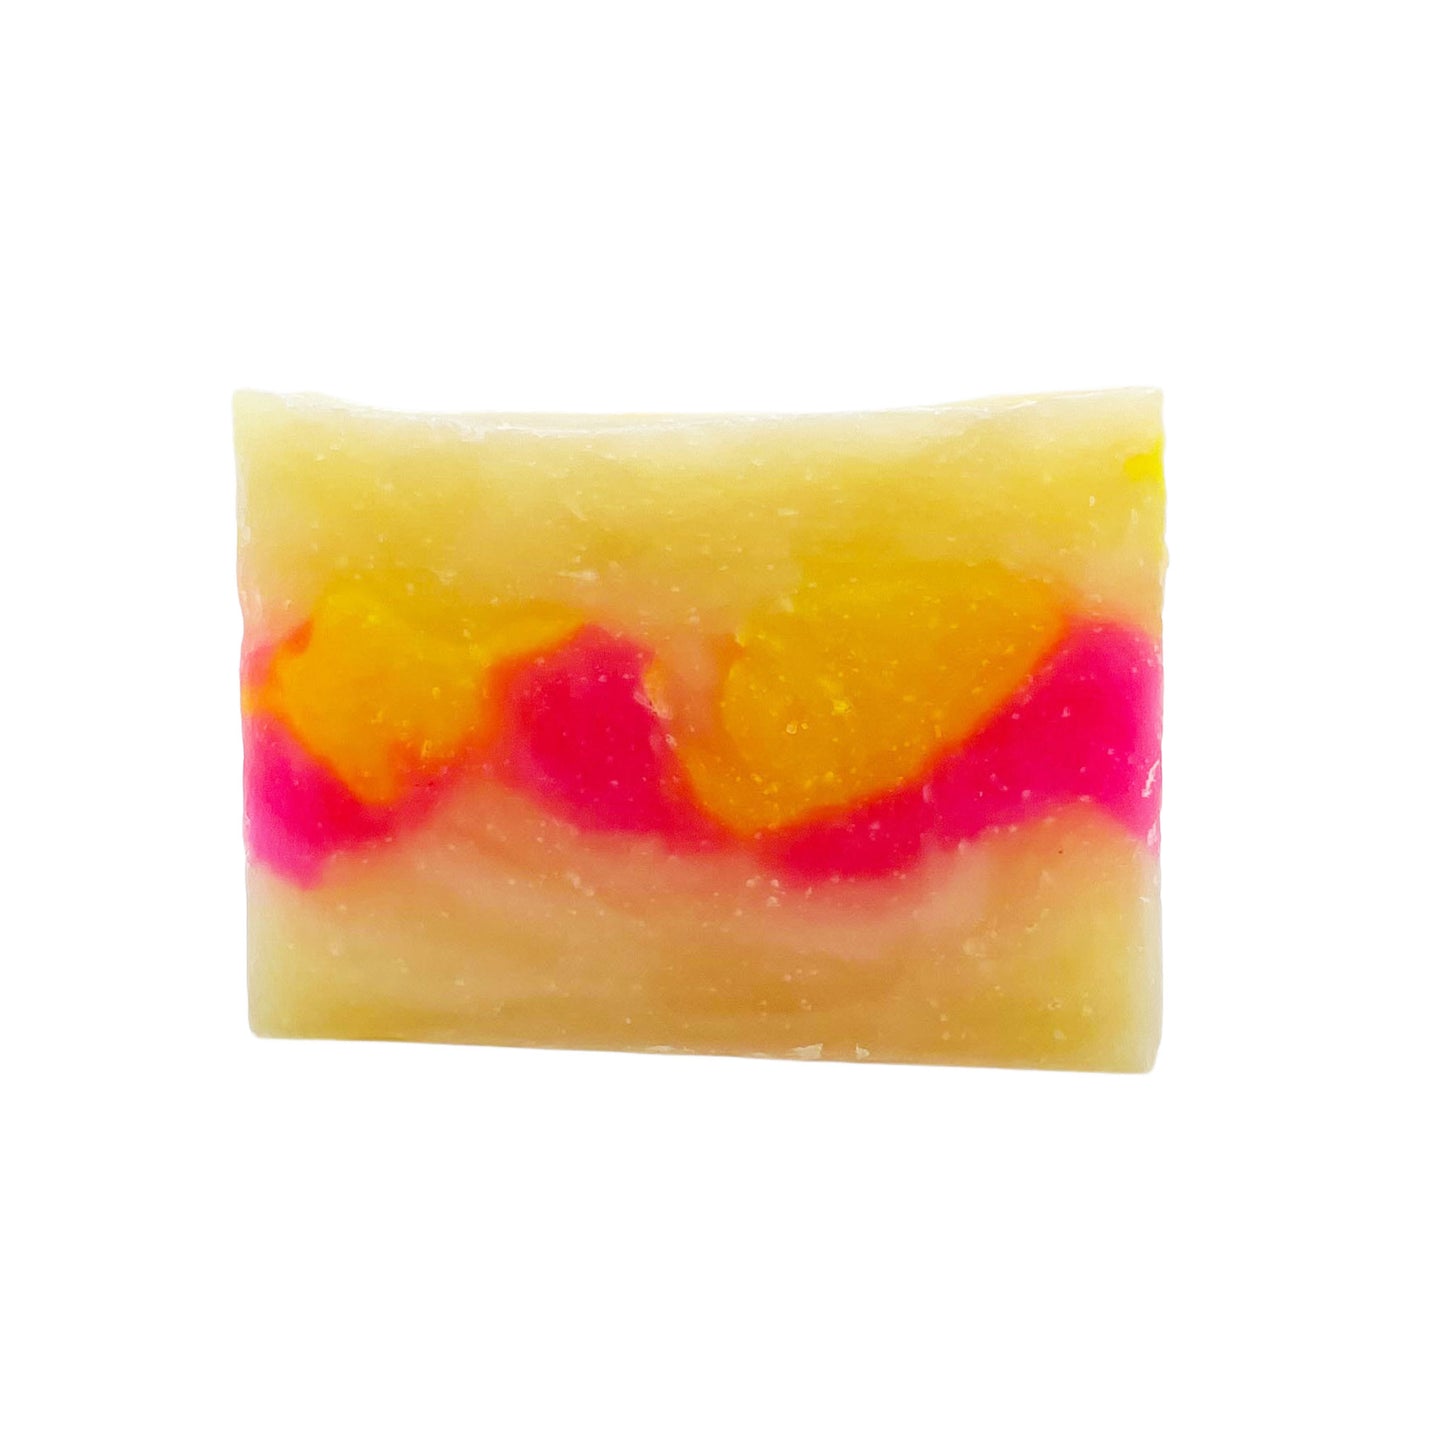 handmade artisan soap by JDNatlady's Creations